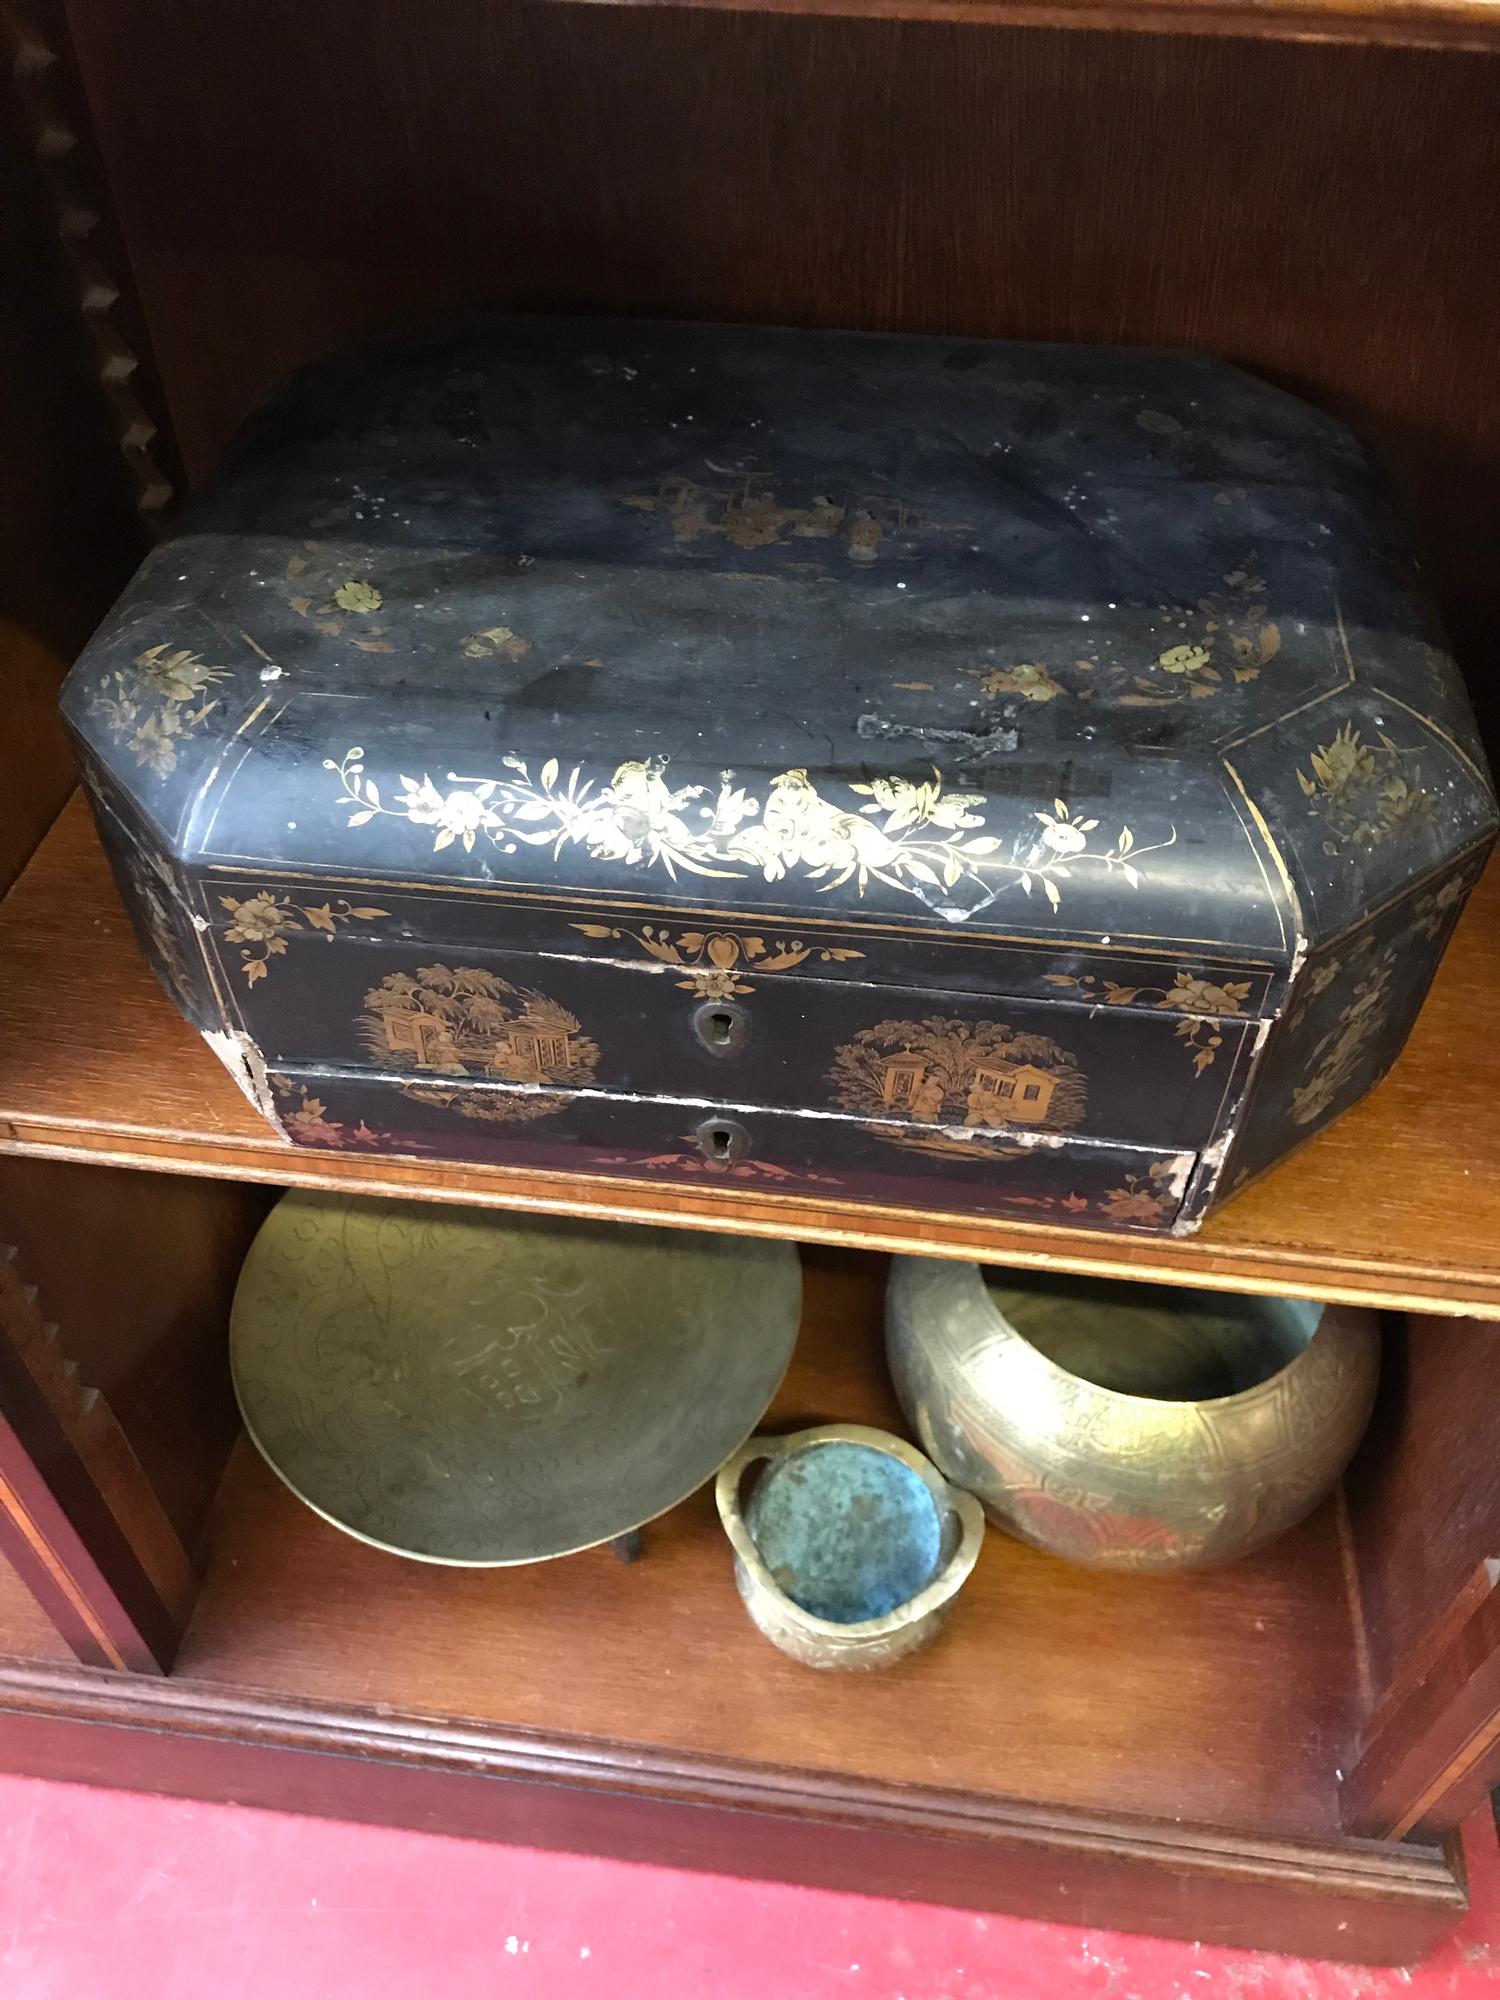 3 Far eastern brass bowls, Censor pot & Lacquered jewellery box (needs attention) - Image 2 of 2